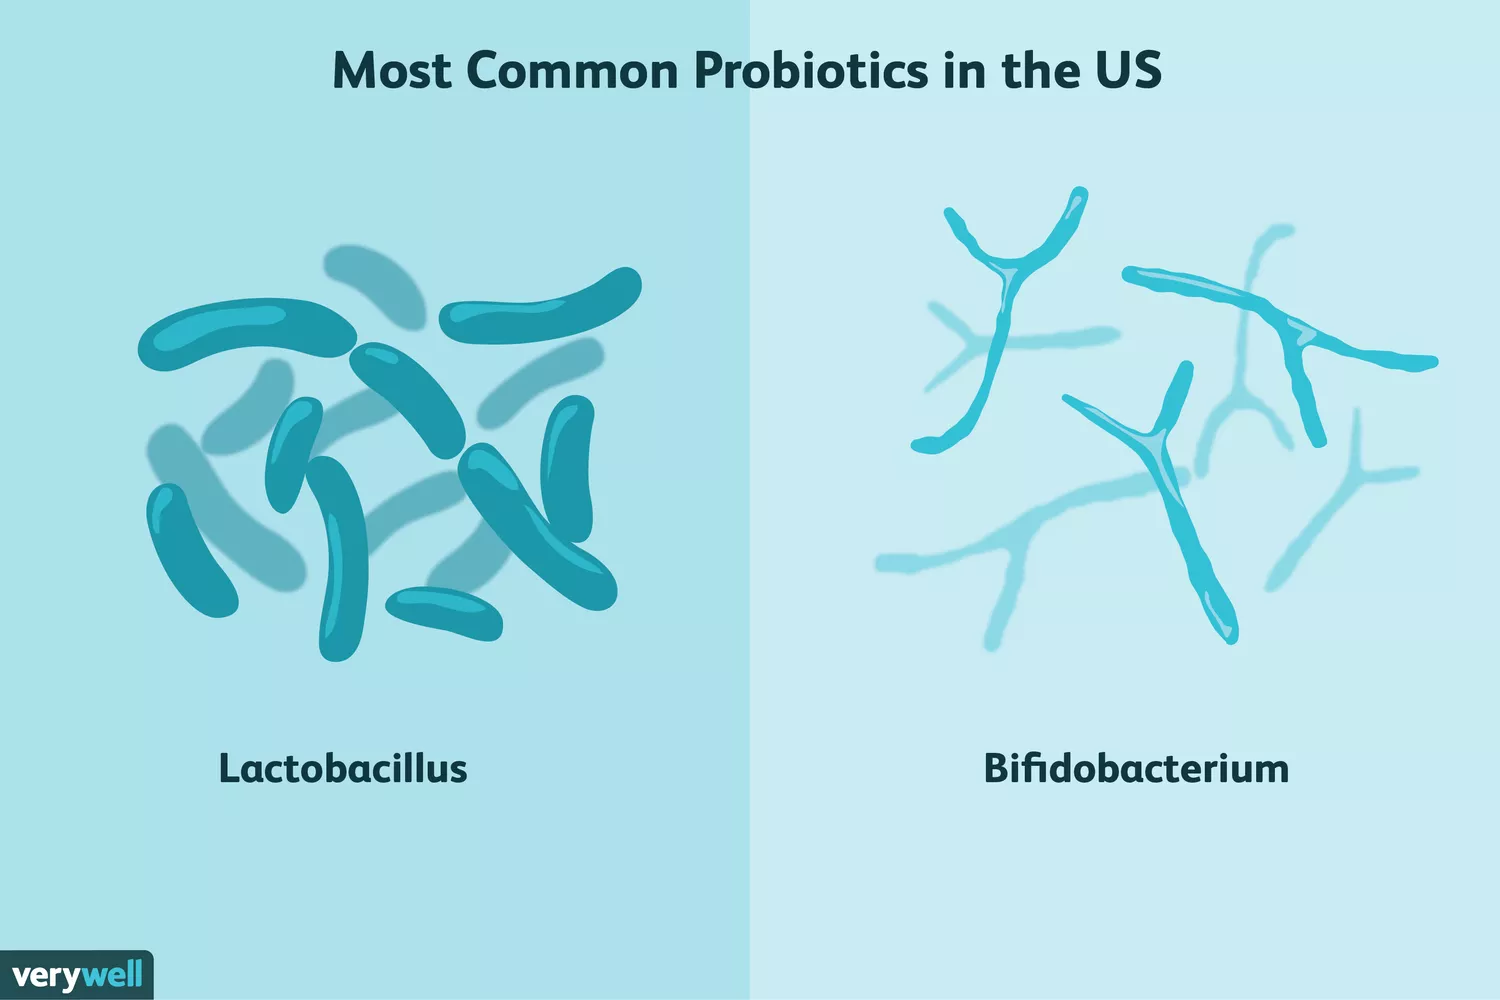 Probiotics: Health Benefits and Side Effects